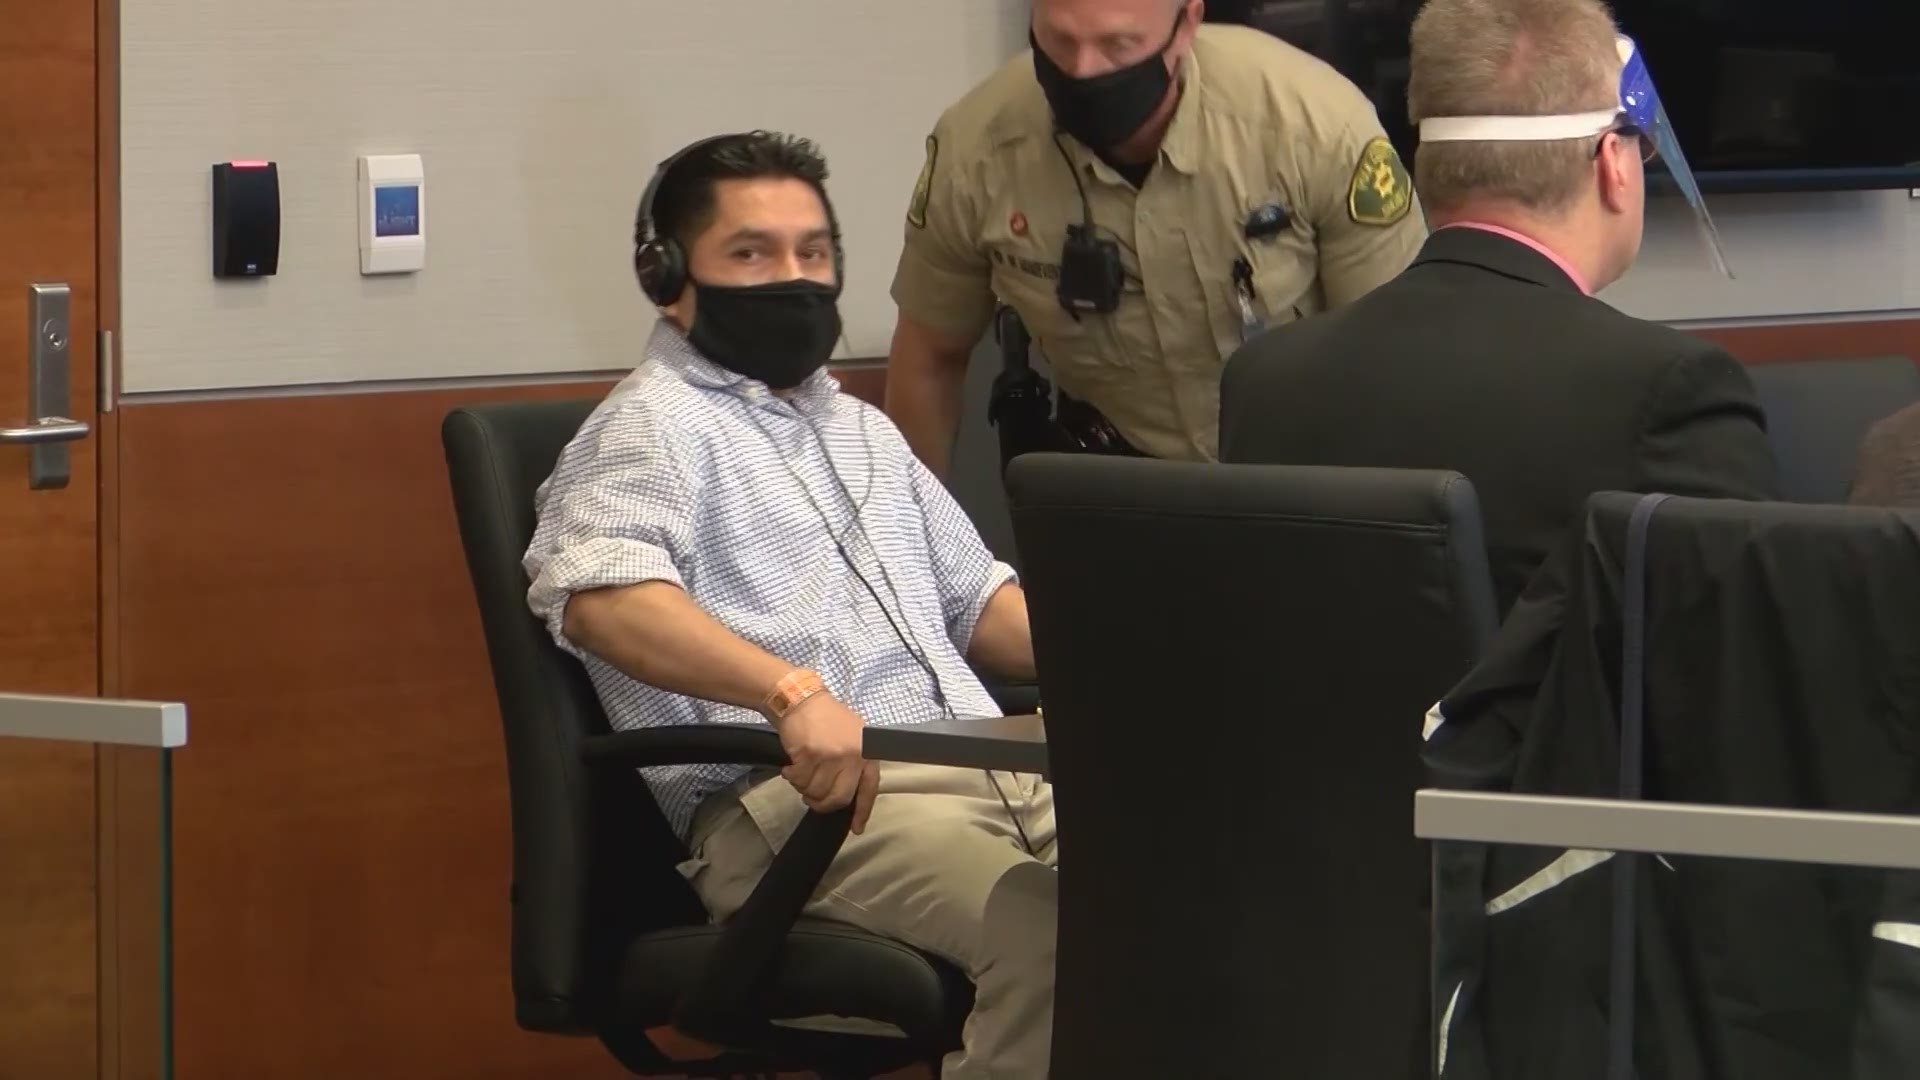 Marvin Esquivel Lopez hasn't heard his fate in the Polk County trial.